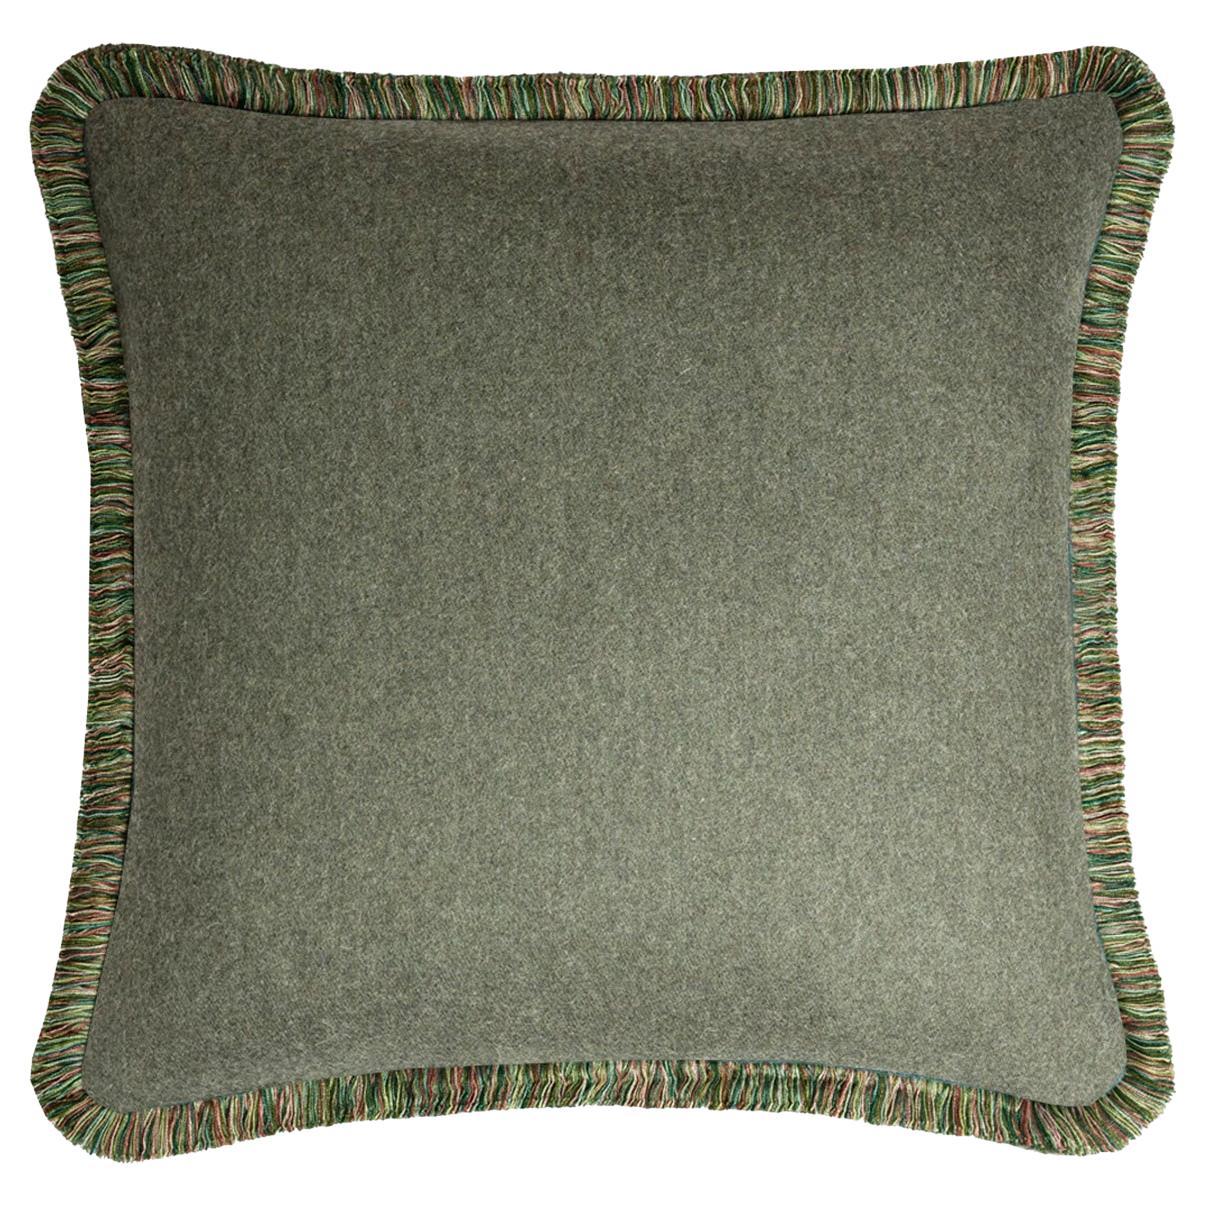 Happy Pillow Svezia Wool Cushion Green with Multicolor Fringes